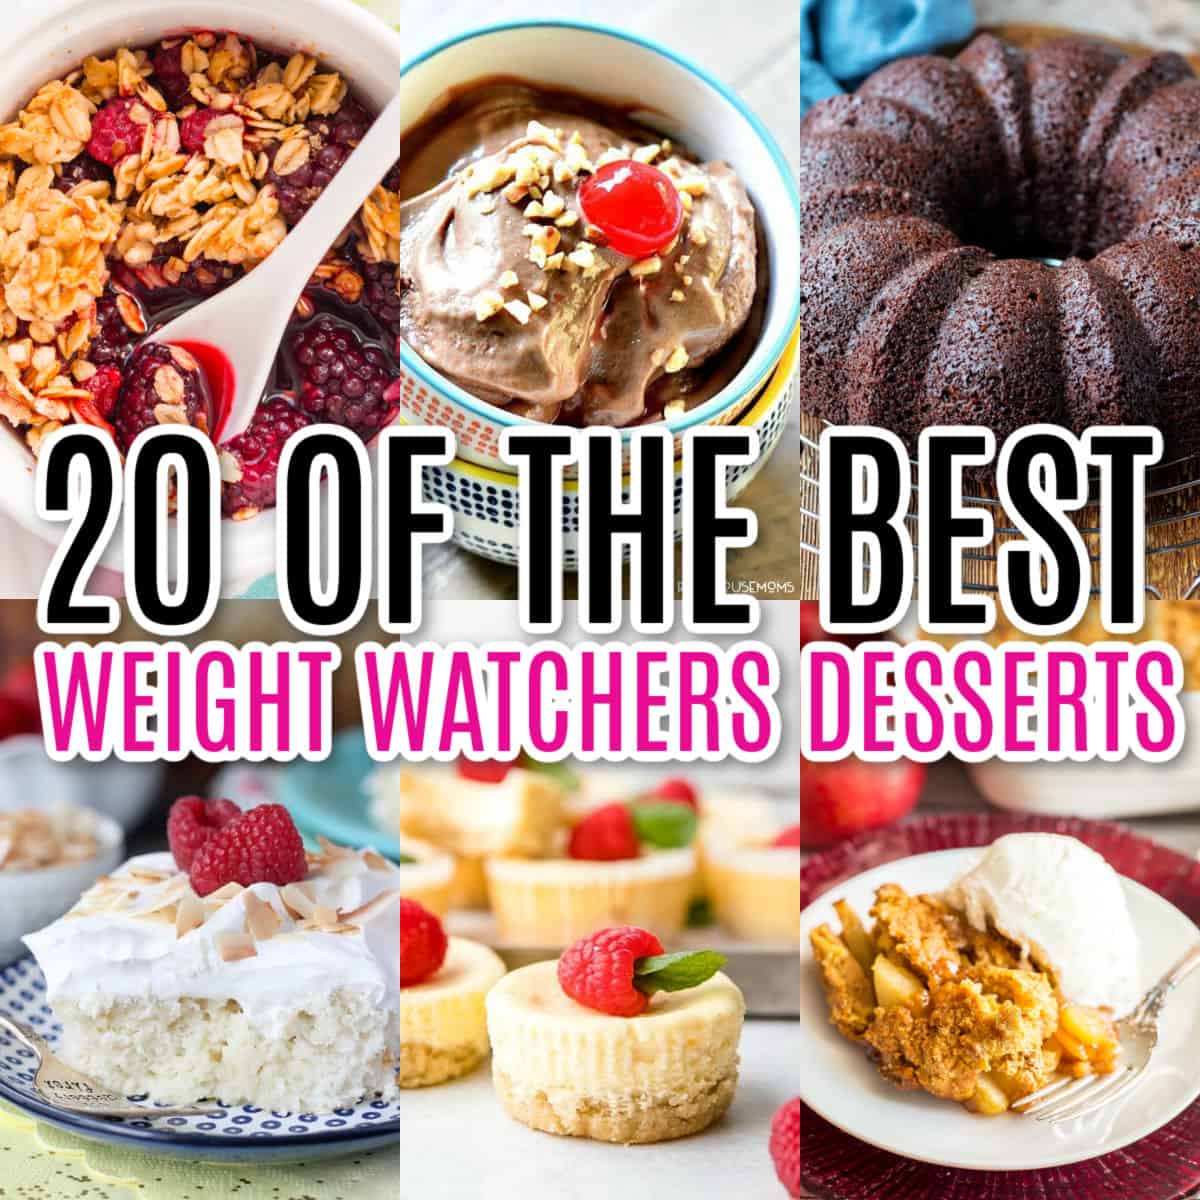 20 Of The Best Weight Watchers Desserts ⋆ Real Housemoms